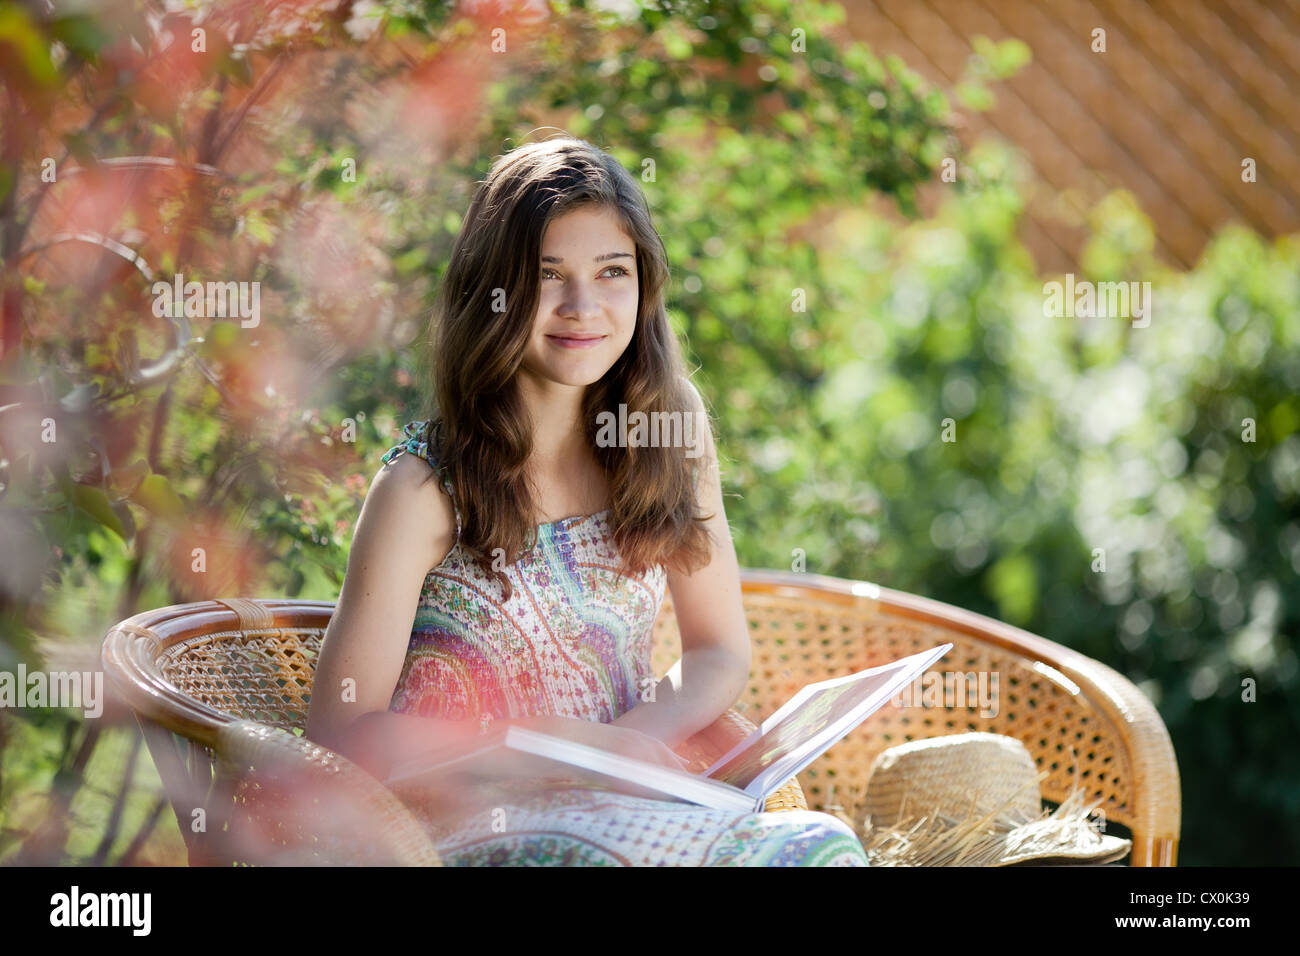 Girl reading book sitting in wicker chair outdoor in summer day Stock Photo